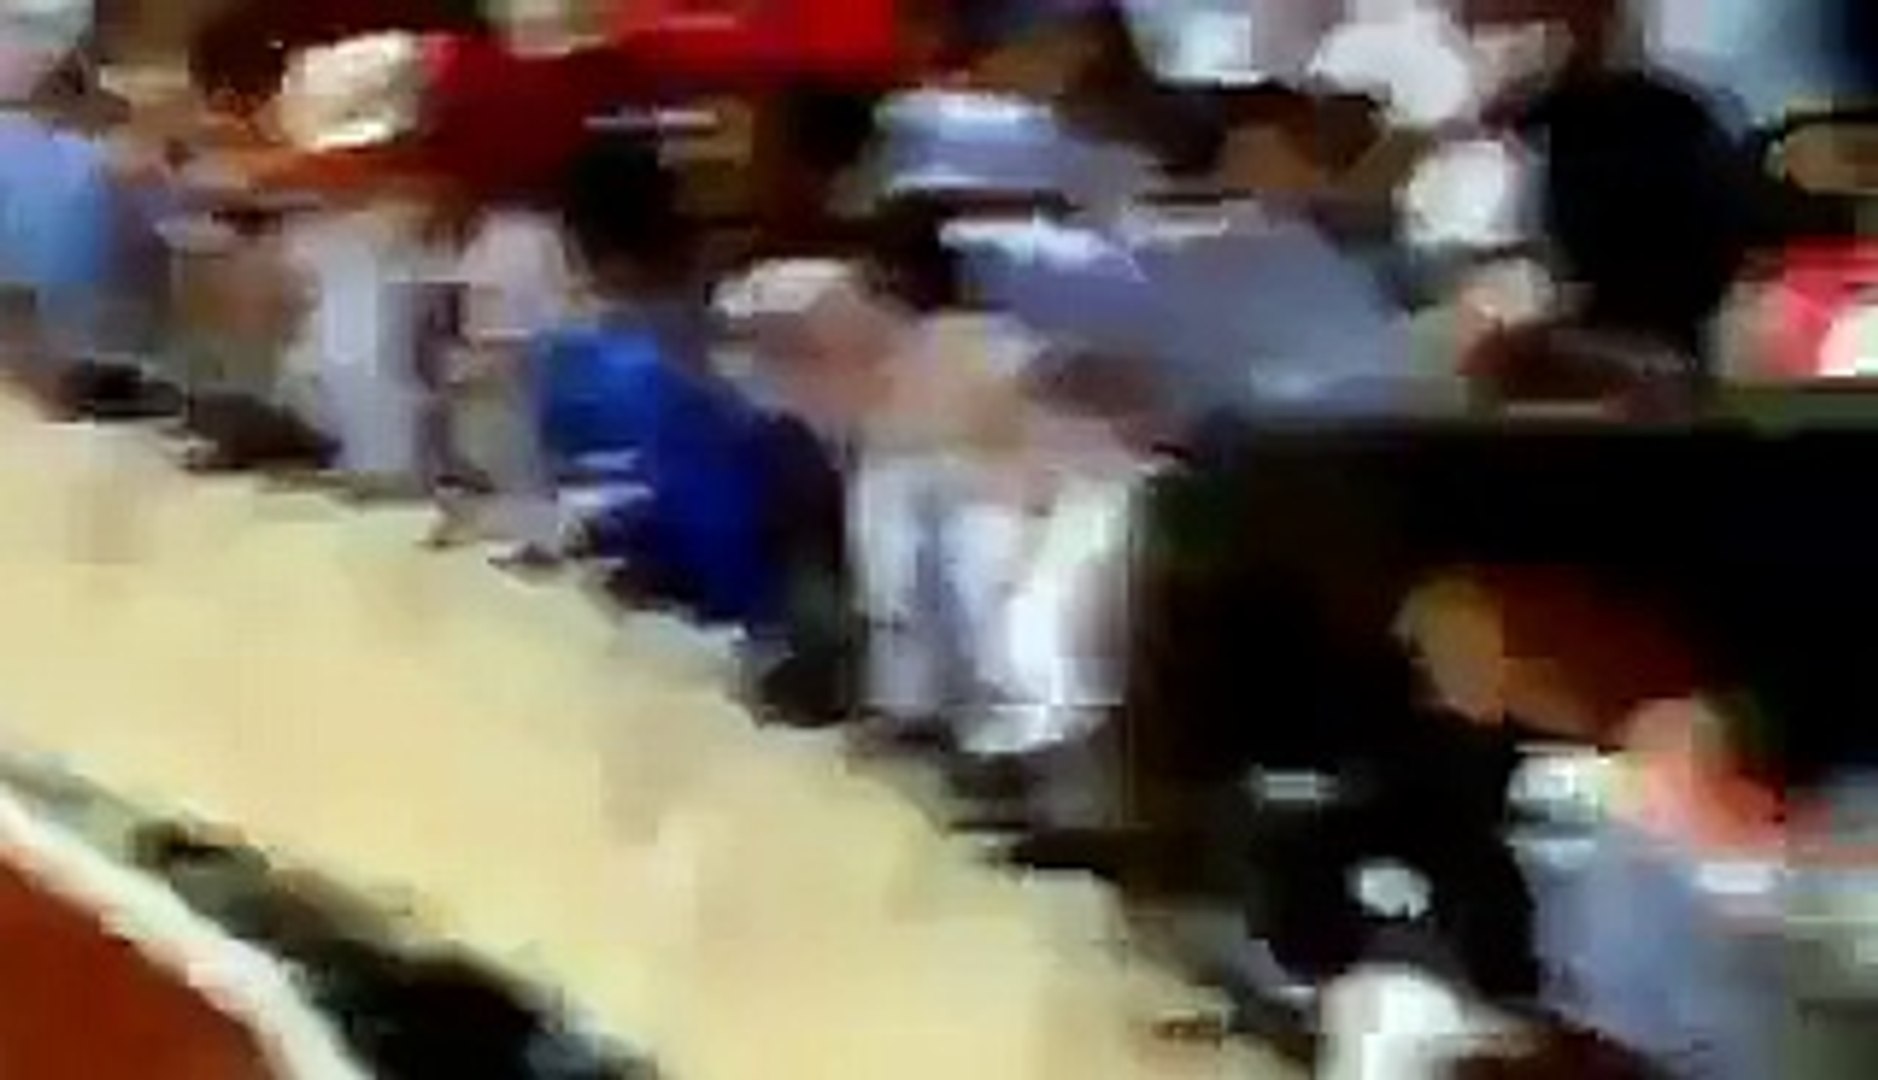 Wild Bull Jumps into Audience Crowd - Shocking Video